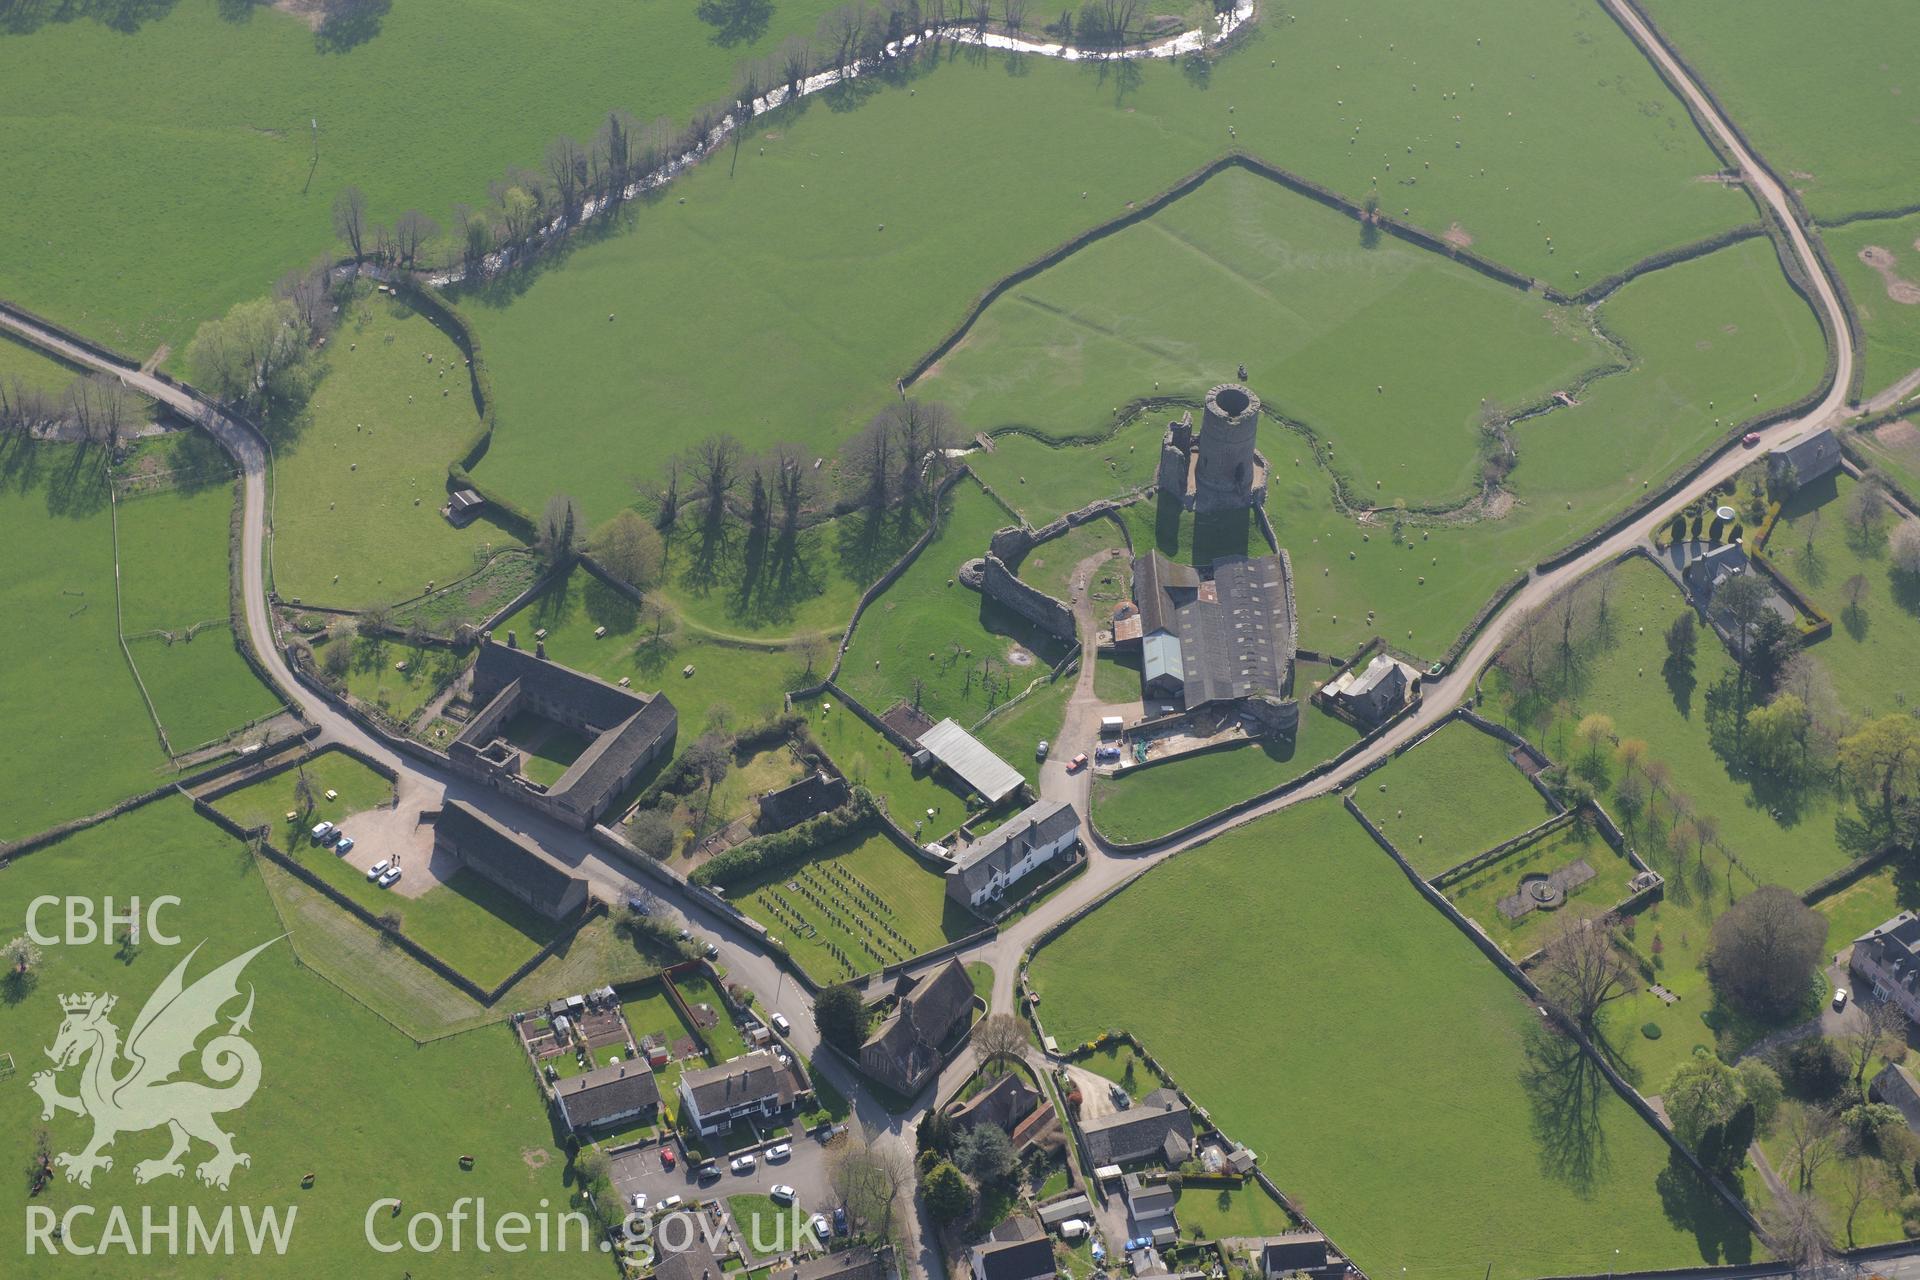 Tretower Village, Castle, Court, Cottage, Barn and Leat, Ty Llys Farm and St John's Church. Oblique aerial photograph taken during the Royal Commission's programme of archaeological aerial reconnaissance by Toby Driver on 21st April 2015